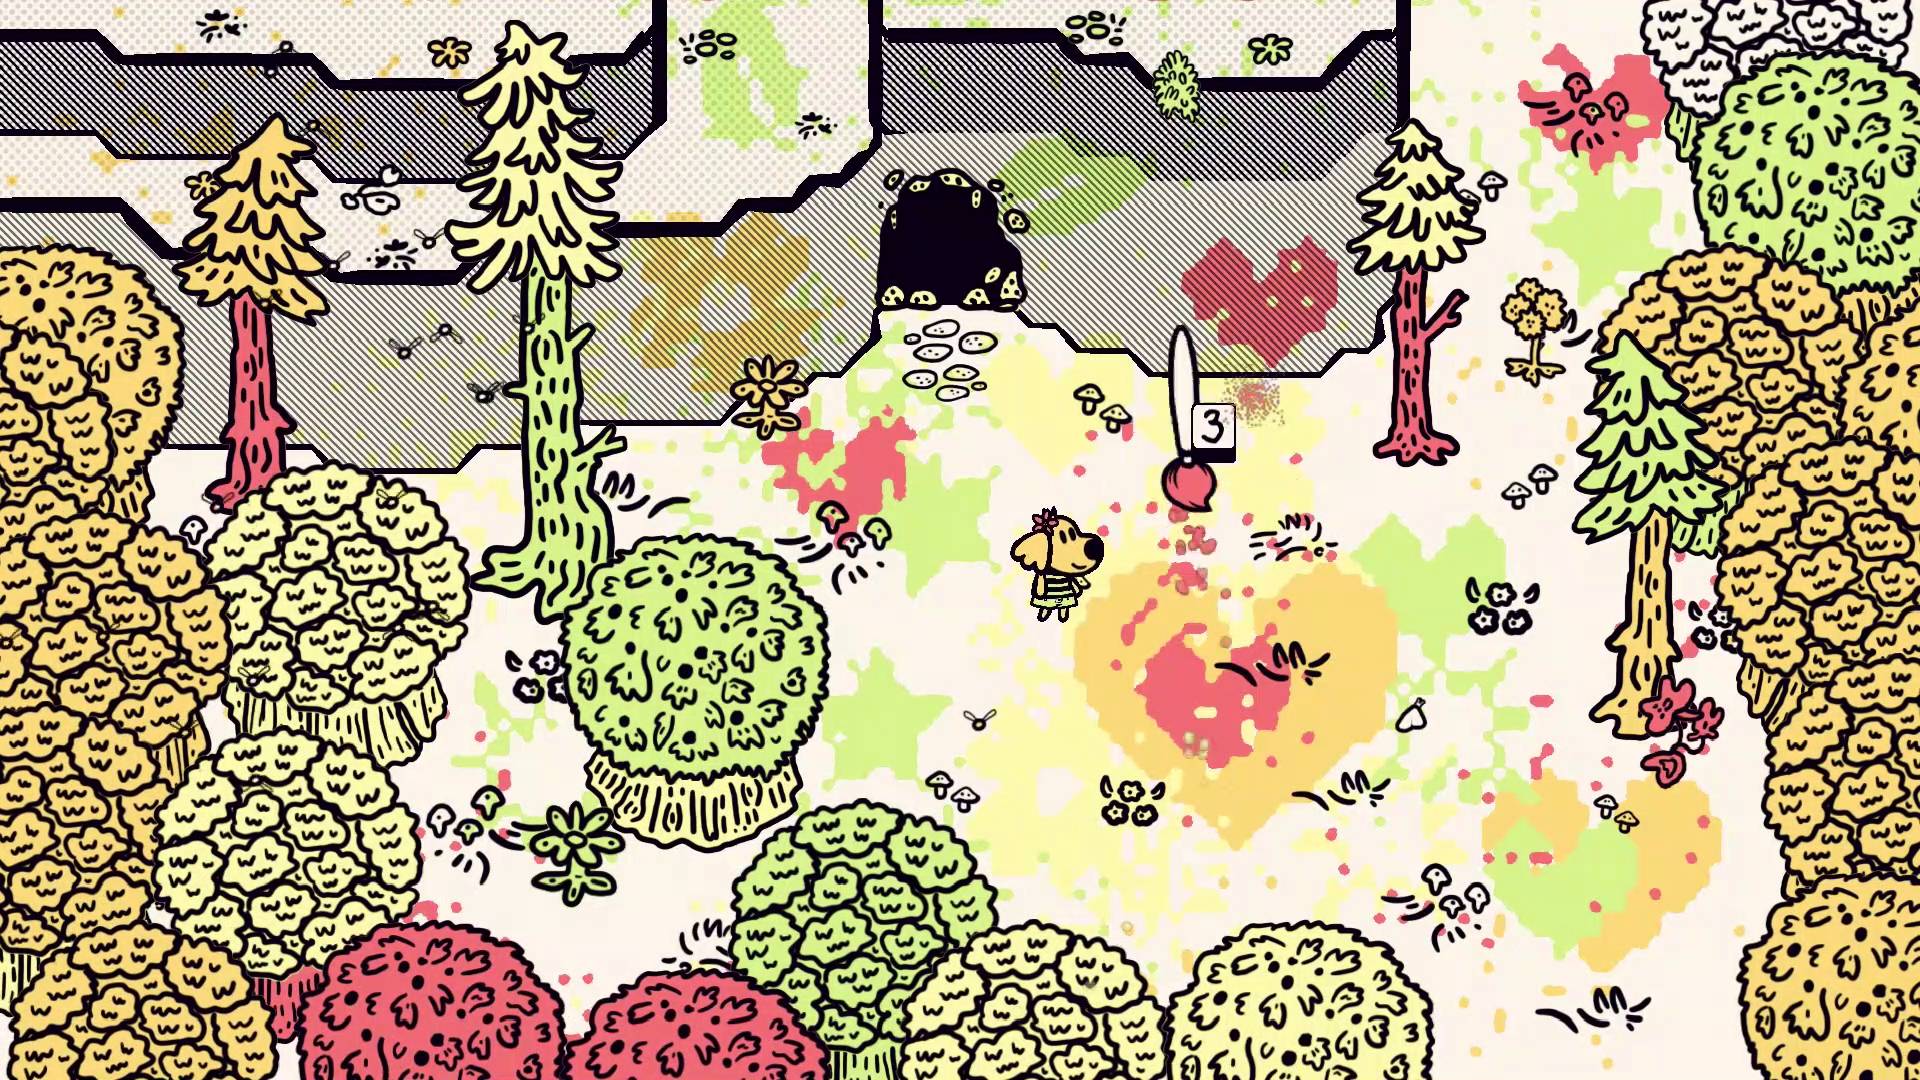 best dog games: a tiny cartoon dog stands in the middle of a forest, filled with colour